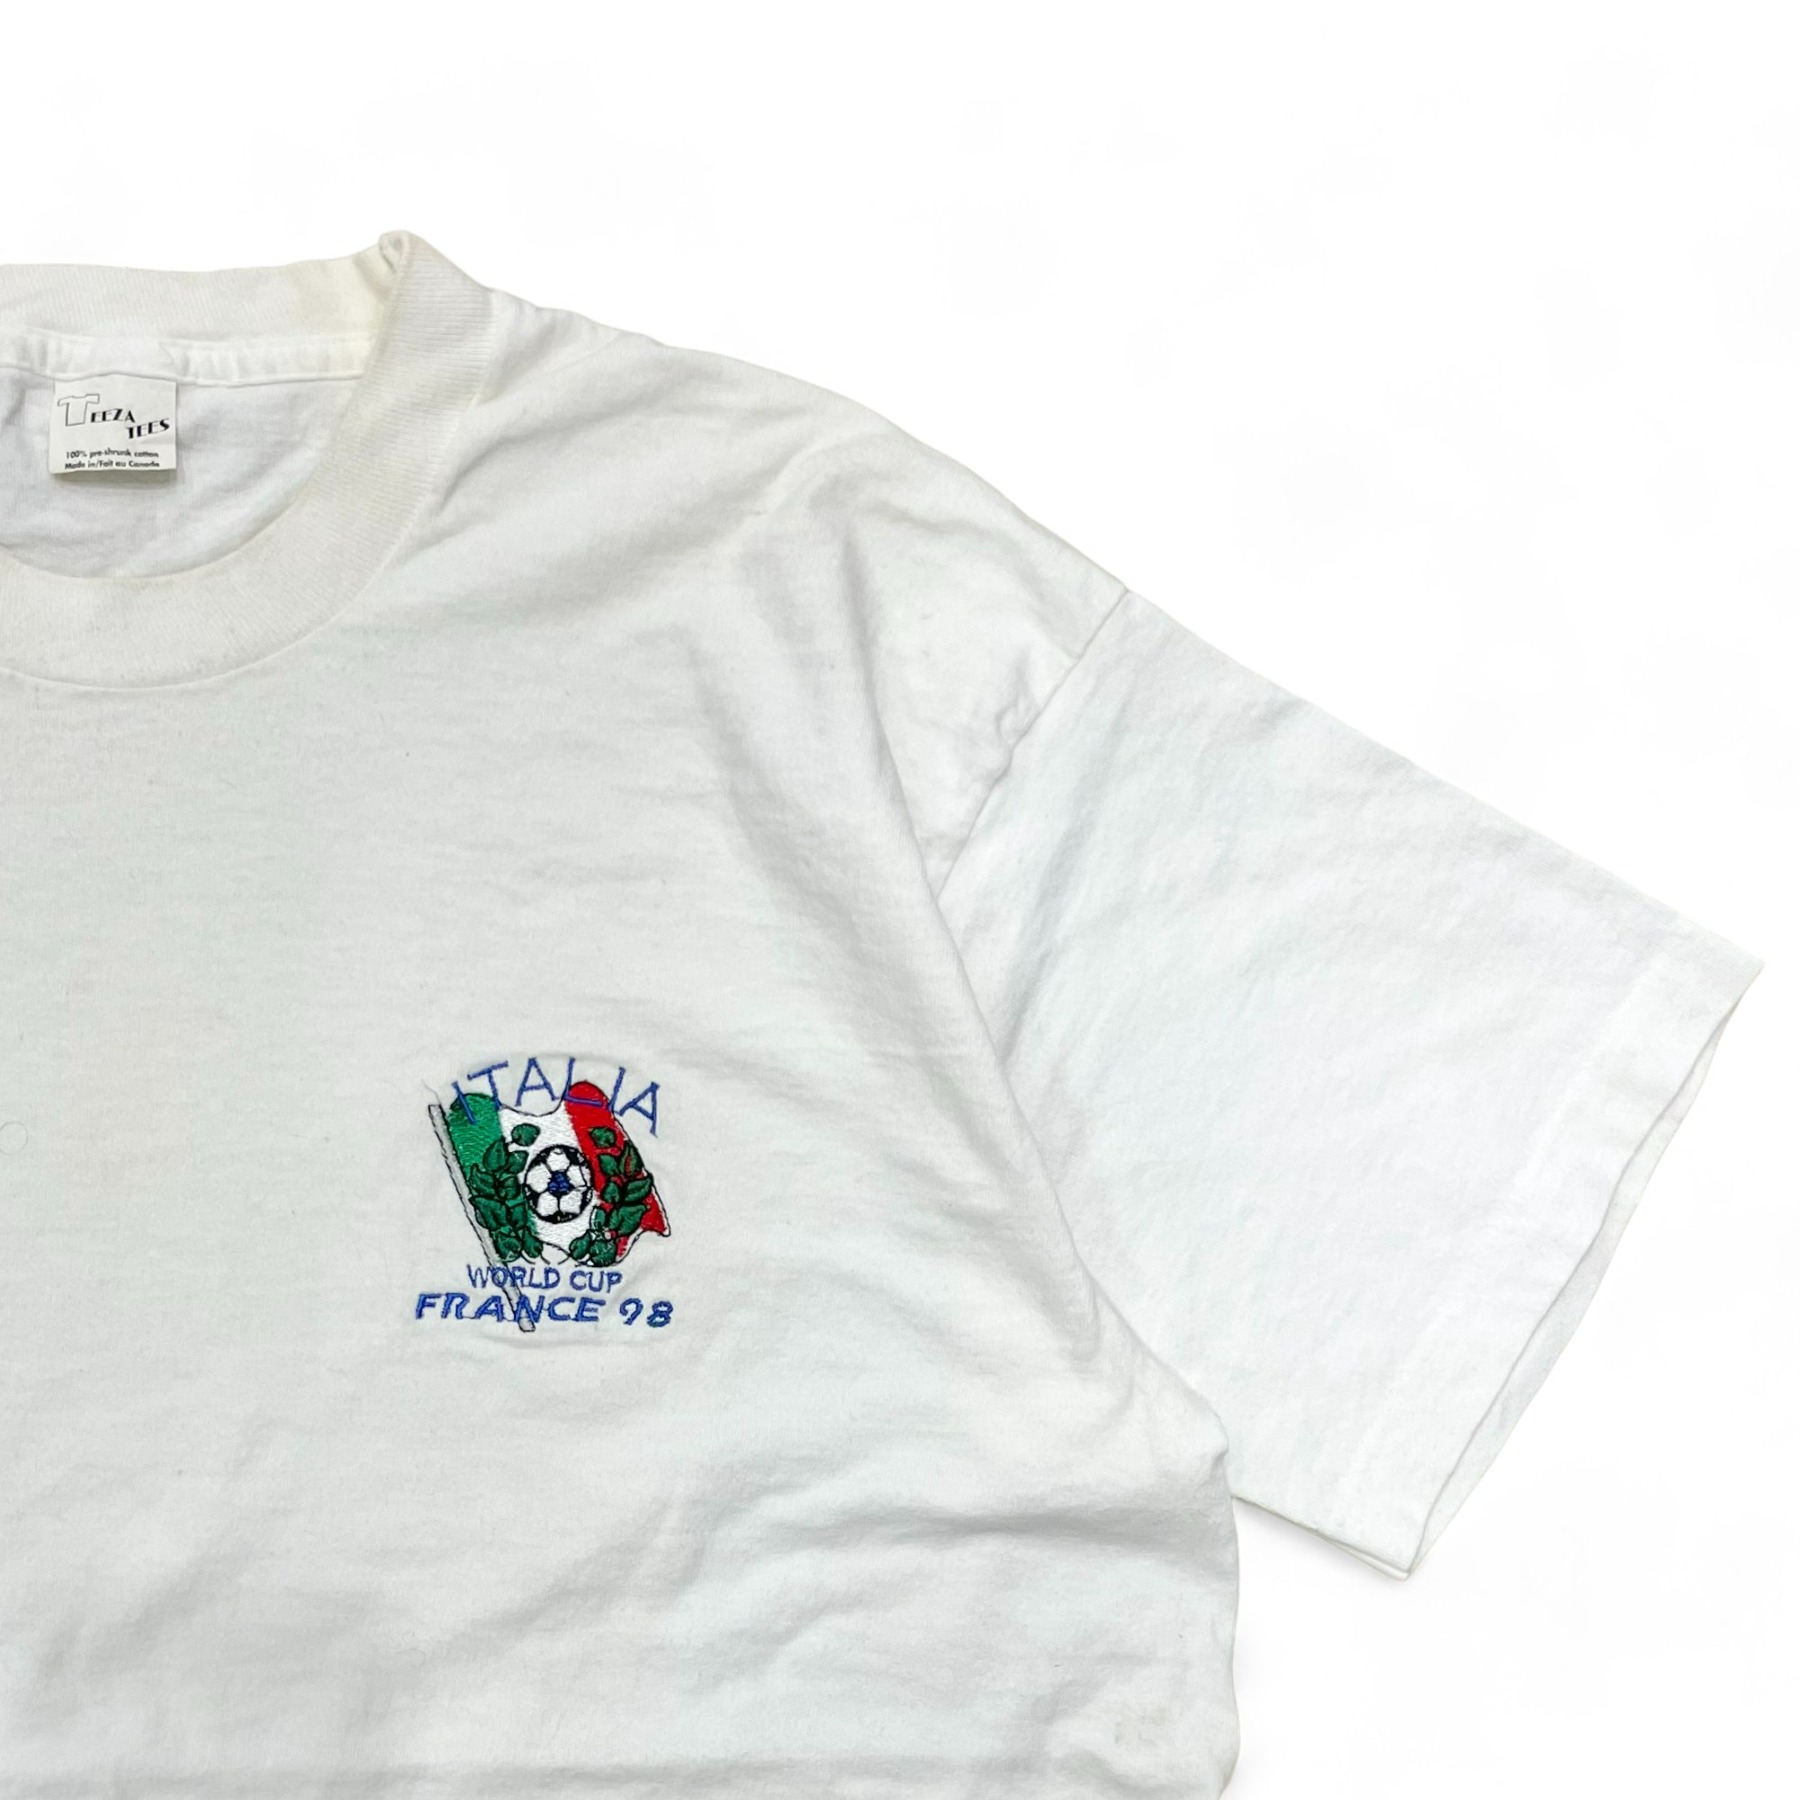 1998 France World Cup Tee - L